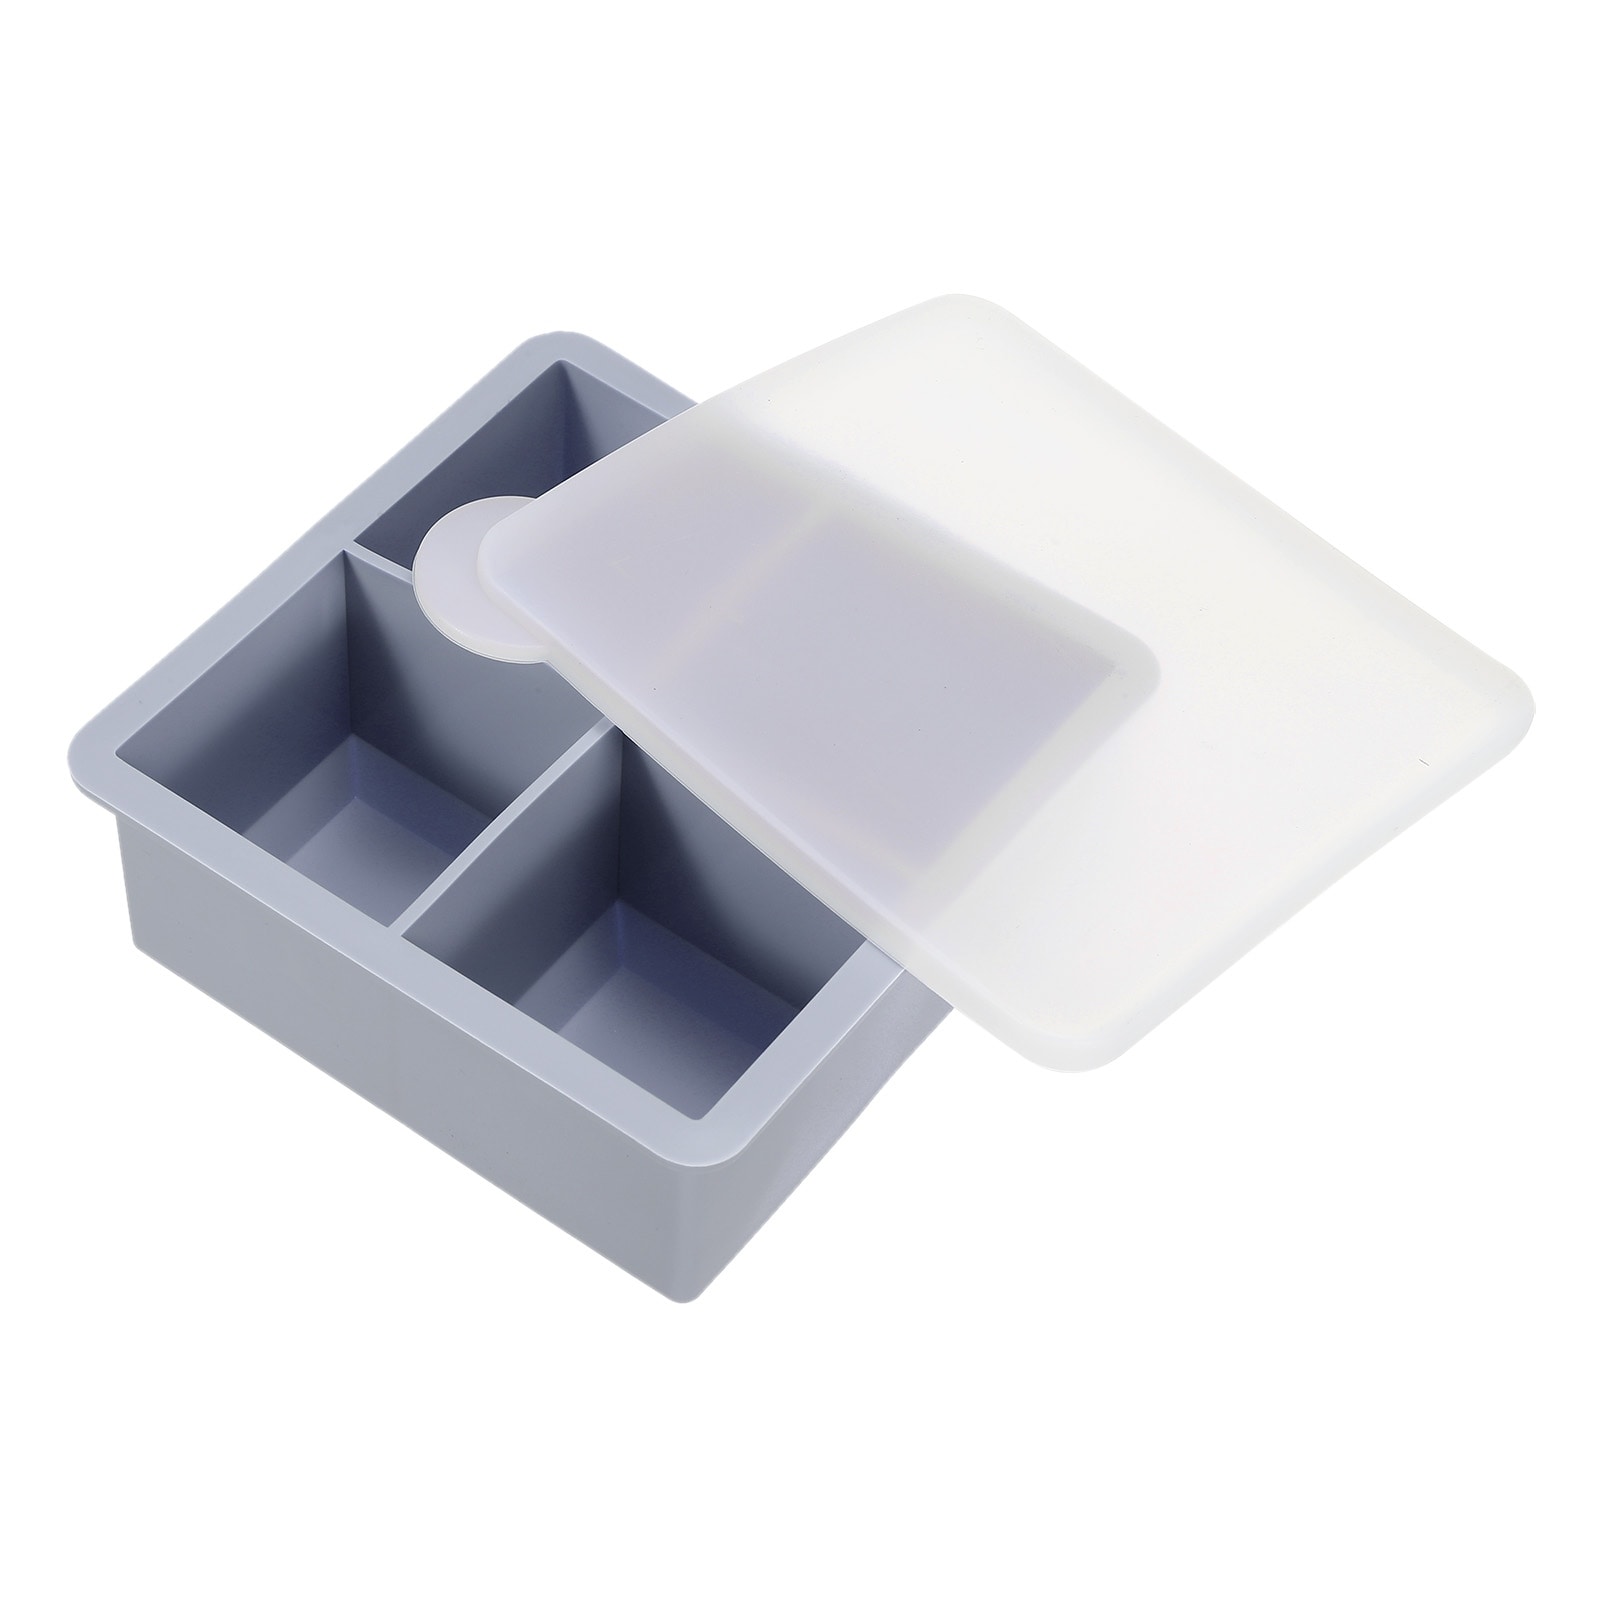 https://ak1.ostkcdn.com/images/products/is/images/direct/6278e9bab7b5fc33effd6cbcc6a13cf7925c627b/Ice-Cube-Mold-4x2-Inch-Silicone-Ice-Cube-Tray-with-Lid-%28Blue%29.jpg